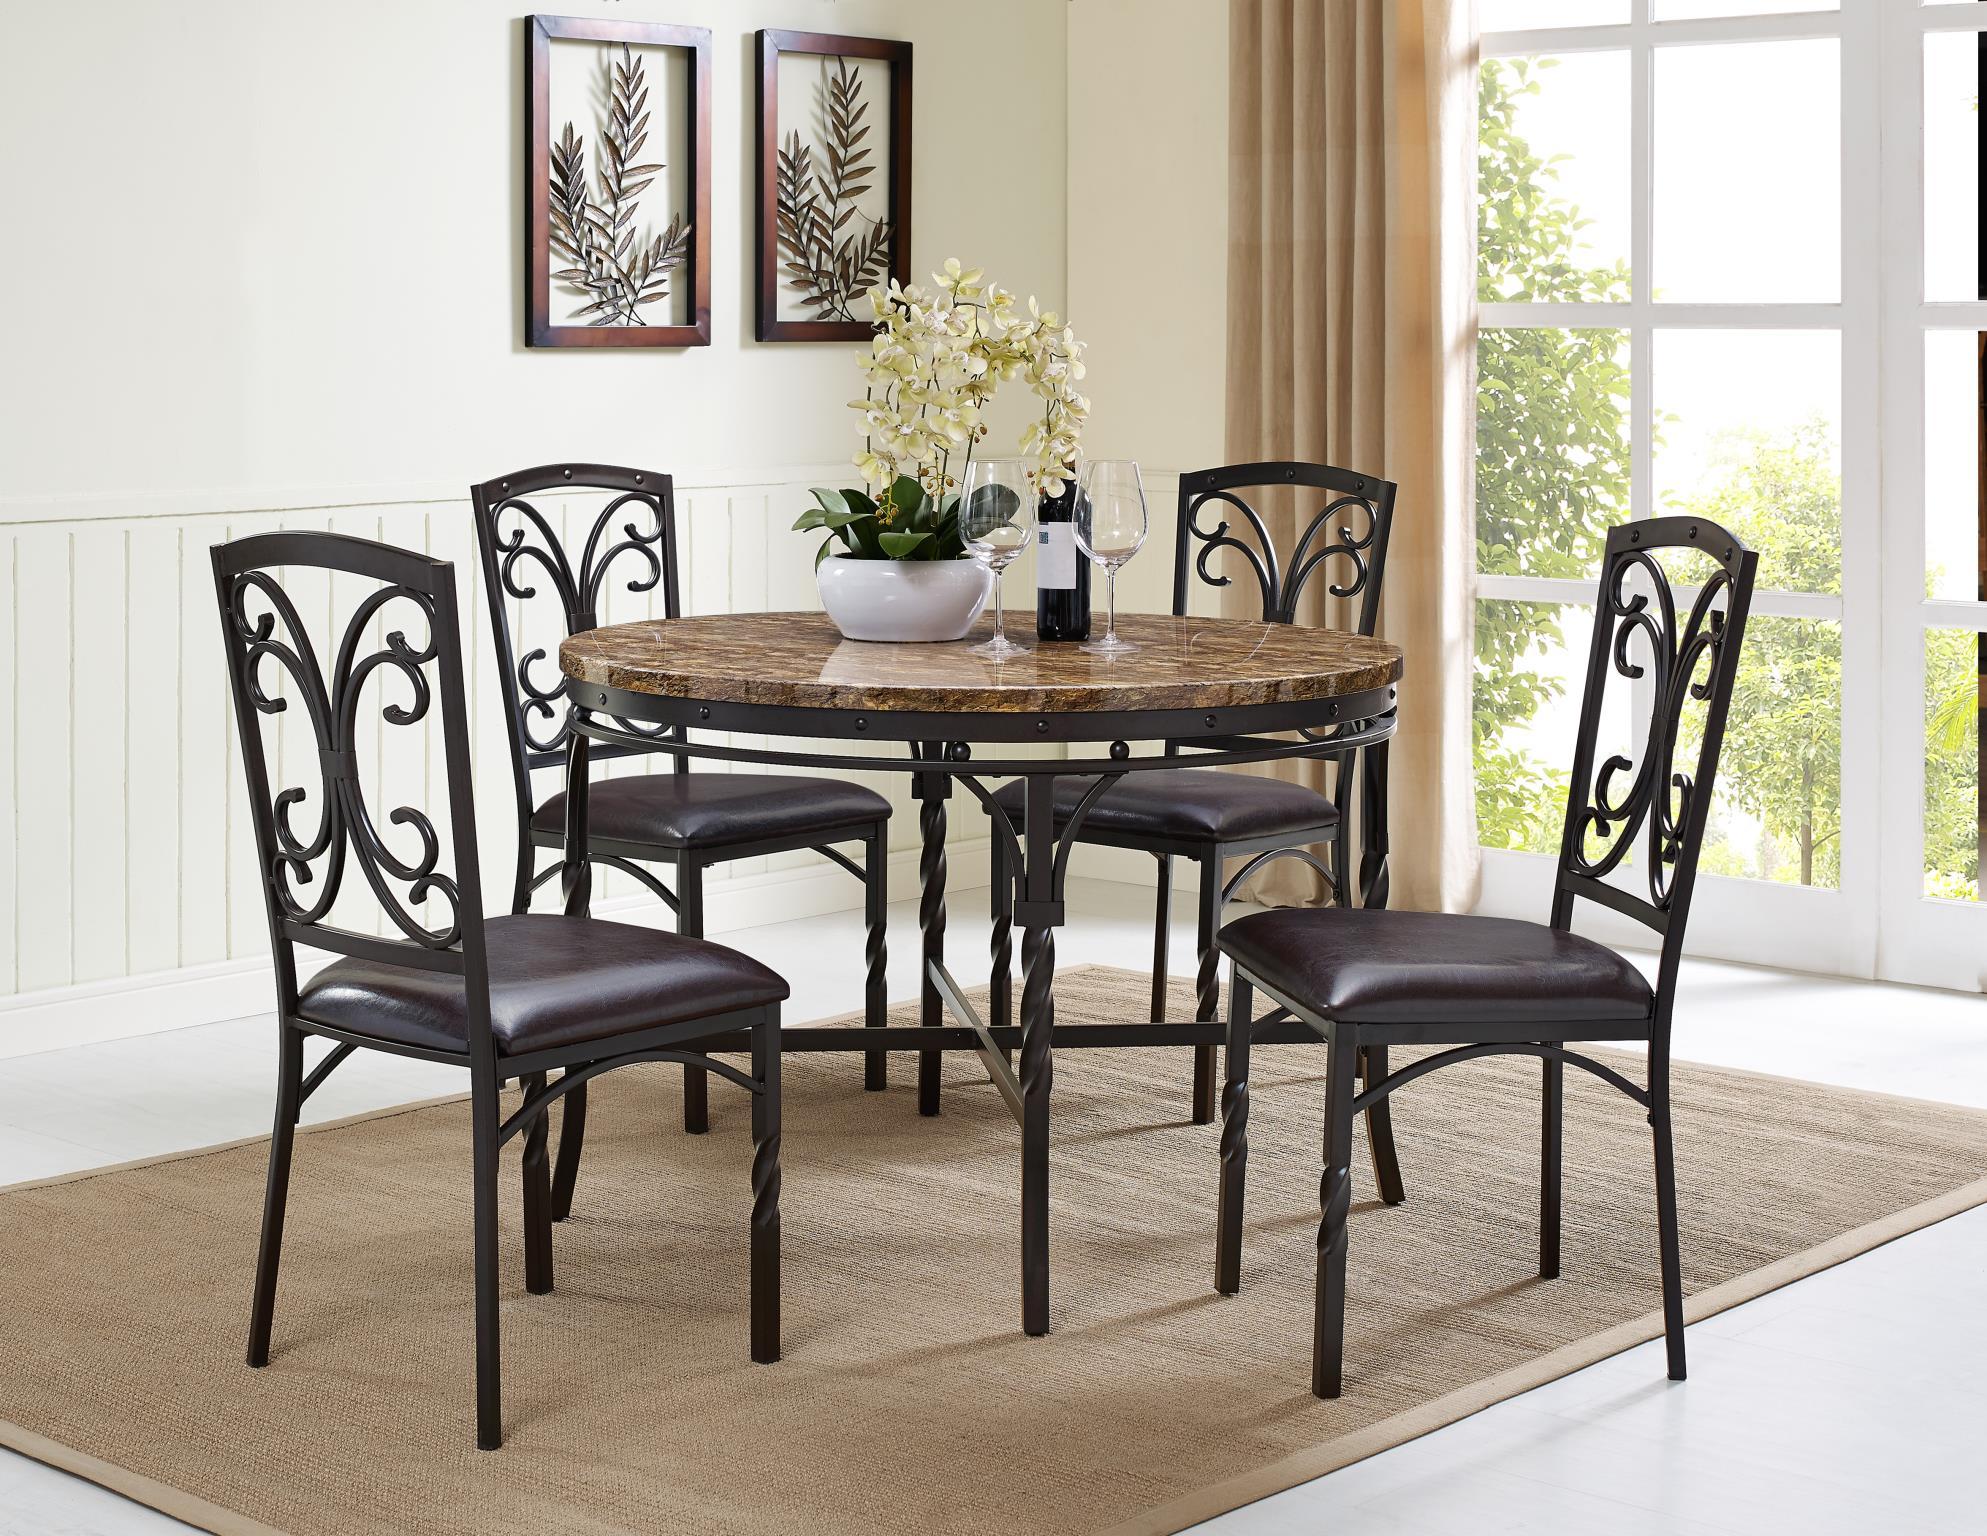 Contemporary, Casual Dining Chair Set Tuscan 4551-4pcs in Brown, Black PU